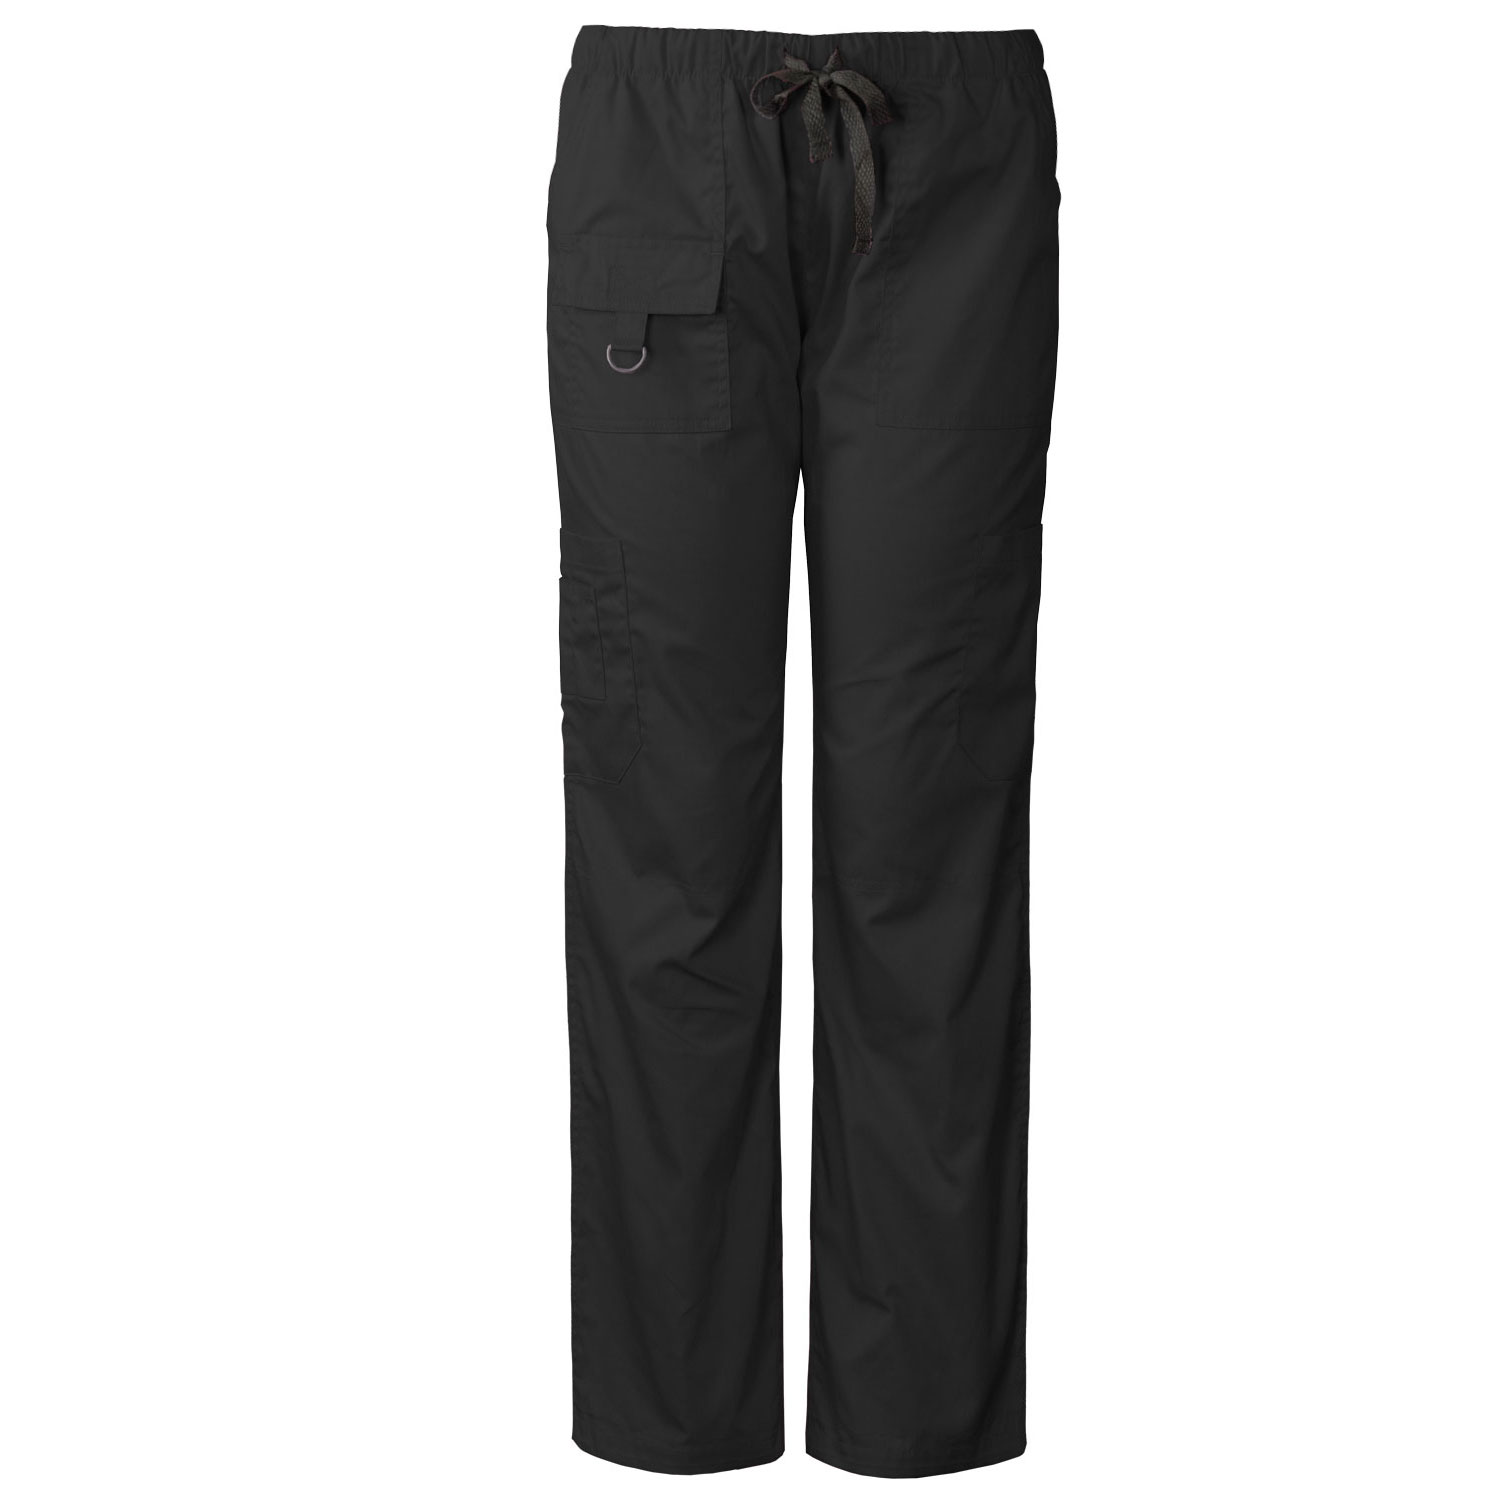 Medgear Unisex Scrubs Pants, Utility Style with 7 Pockets and Loop ...